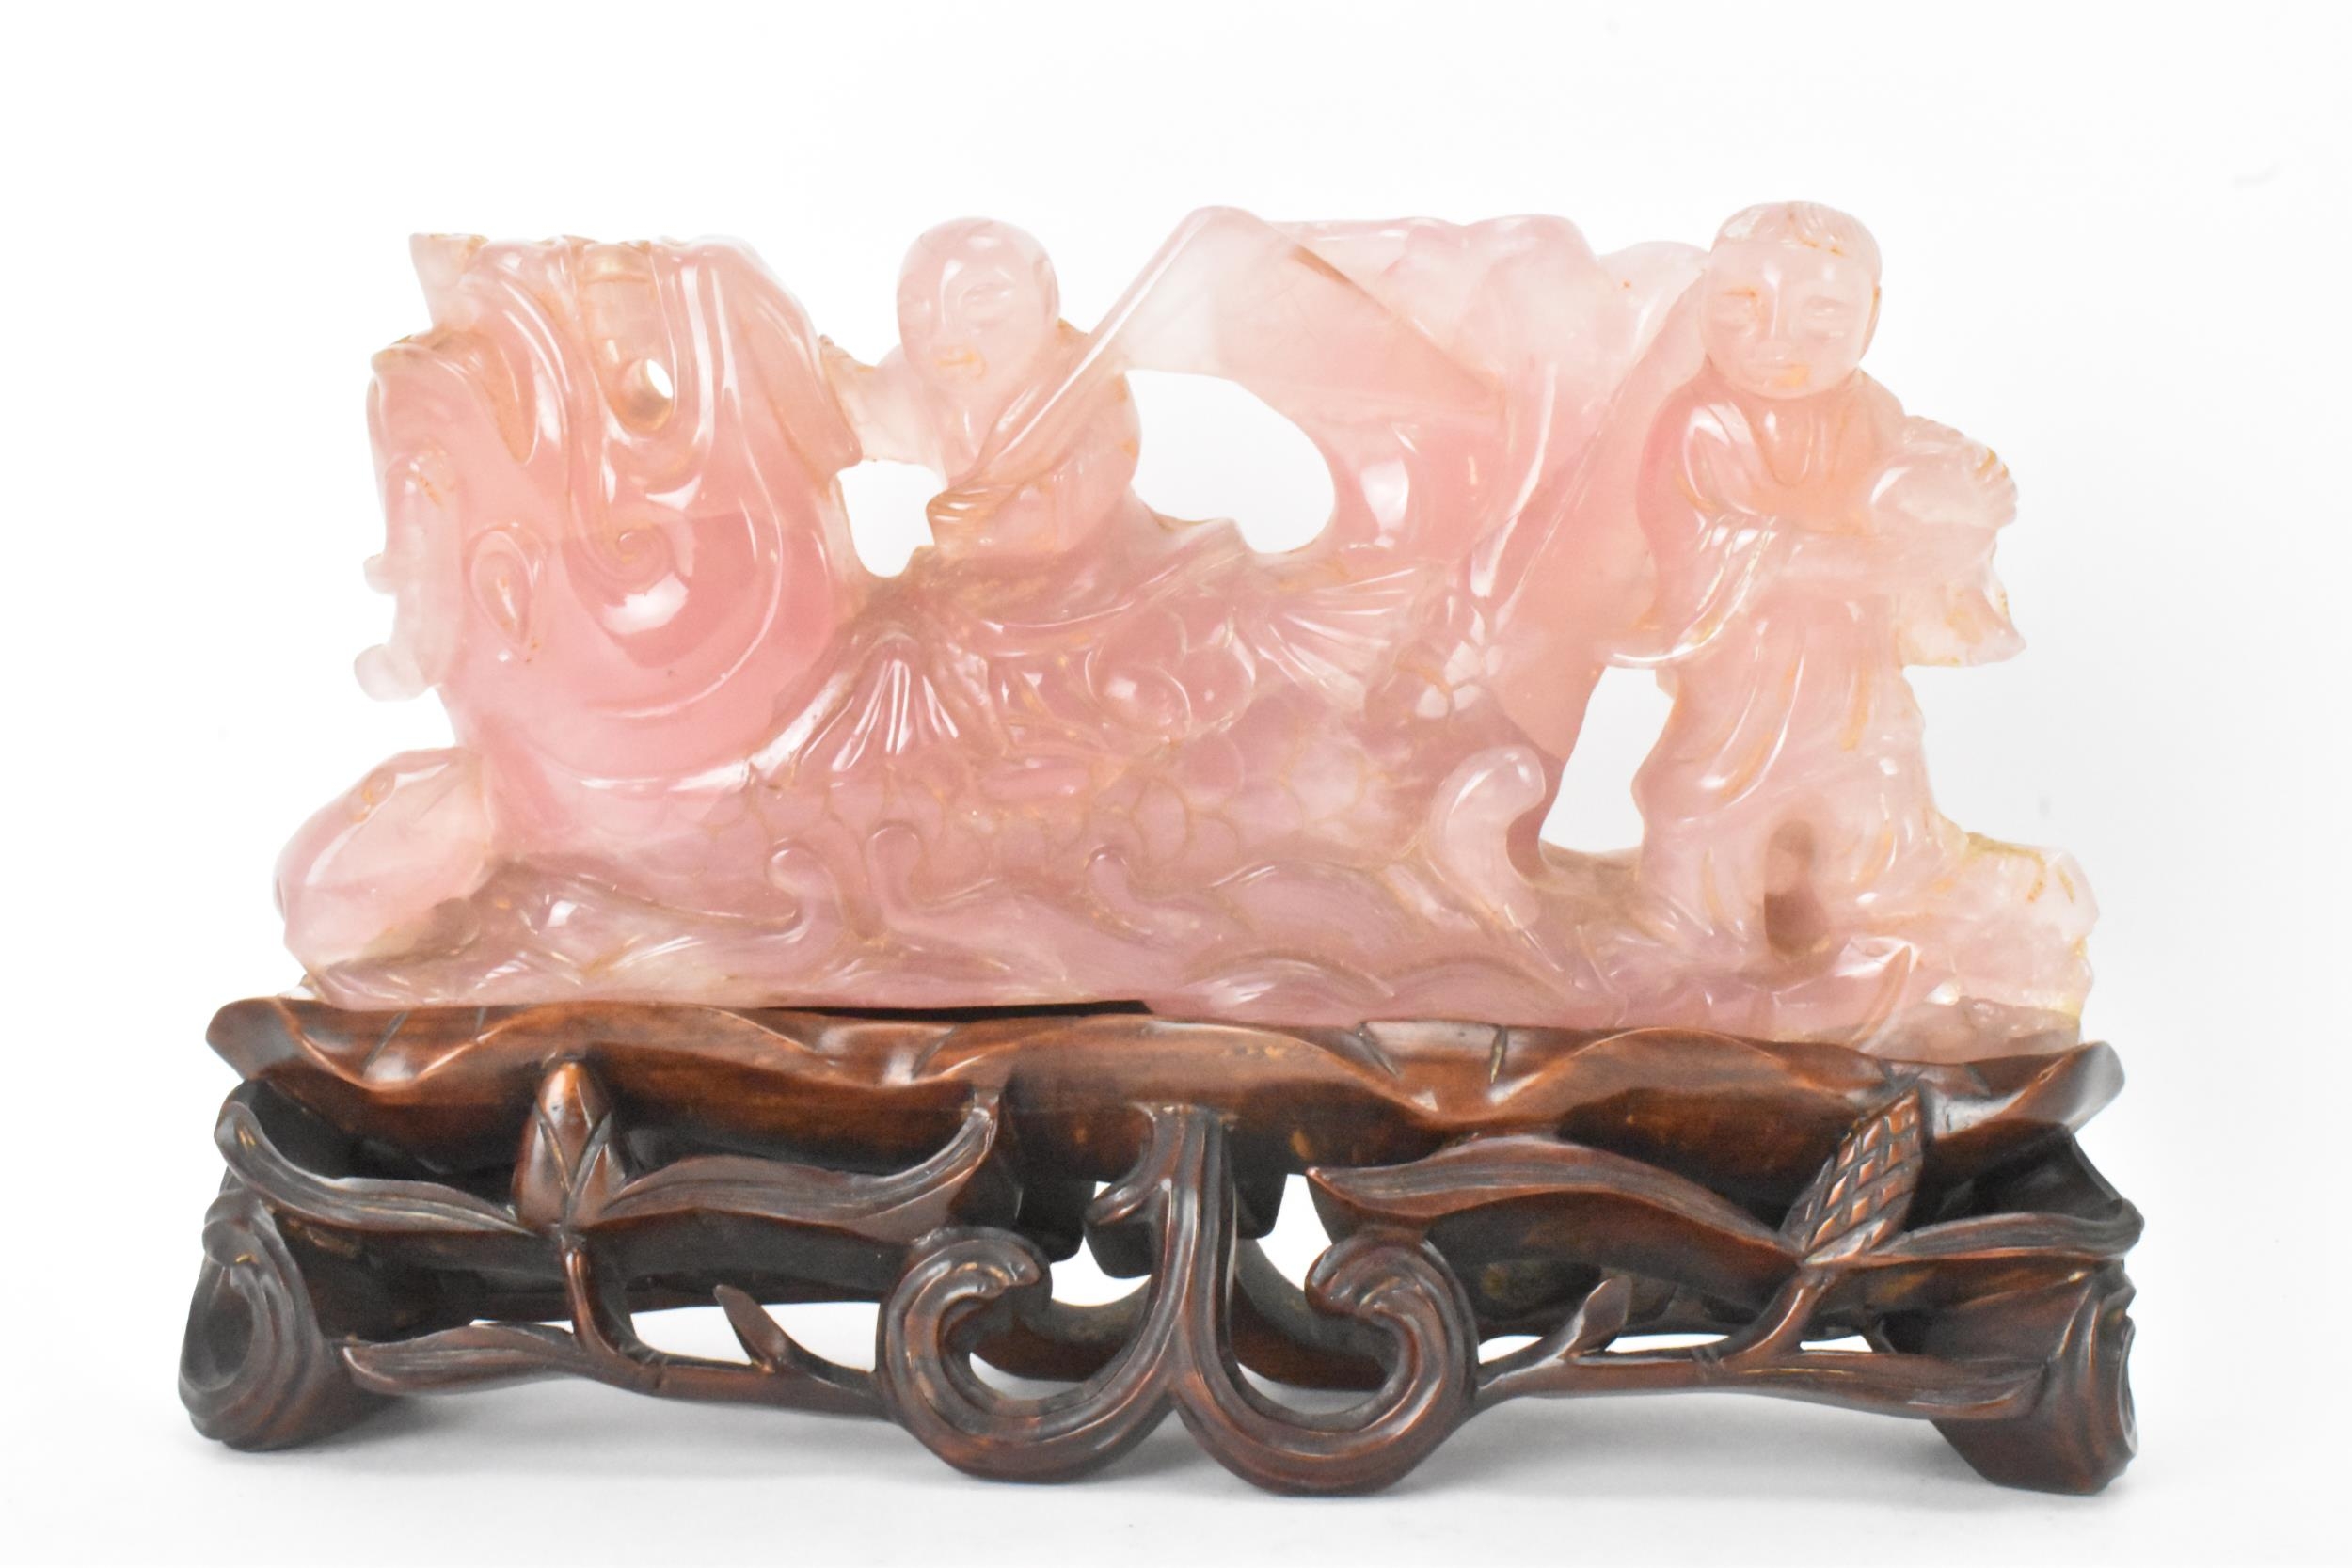 A Chinese 20th century rose quartz figural group of children in a nautical setting riding a sea